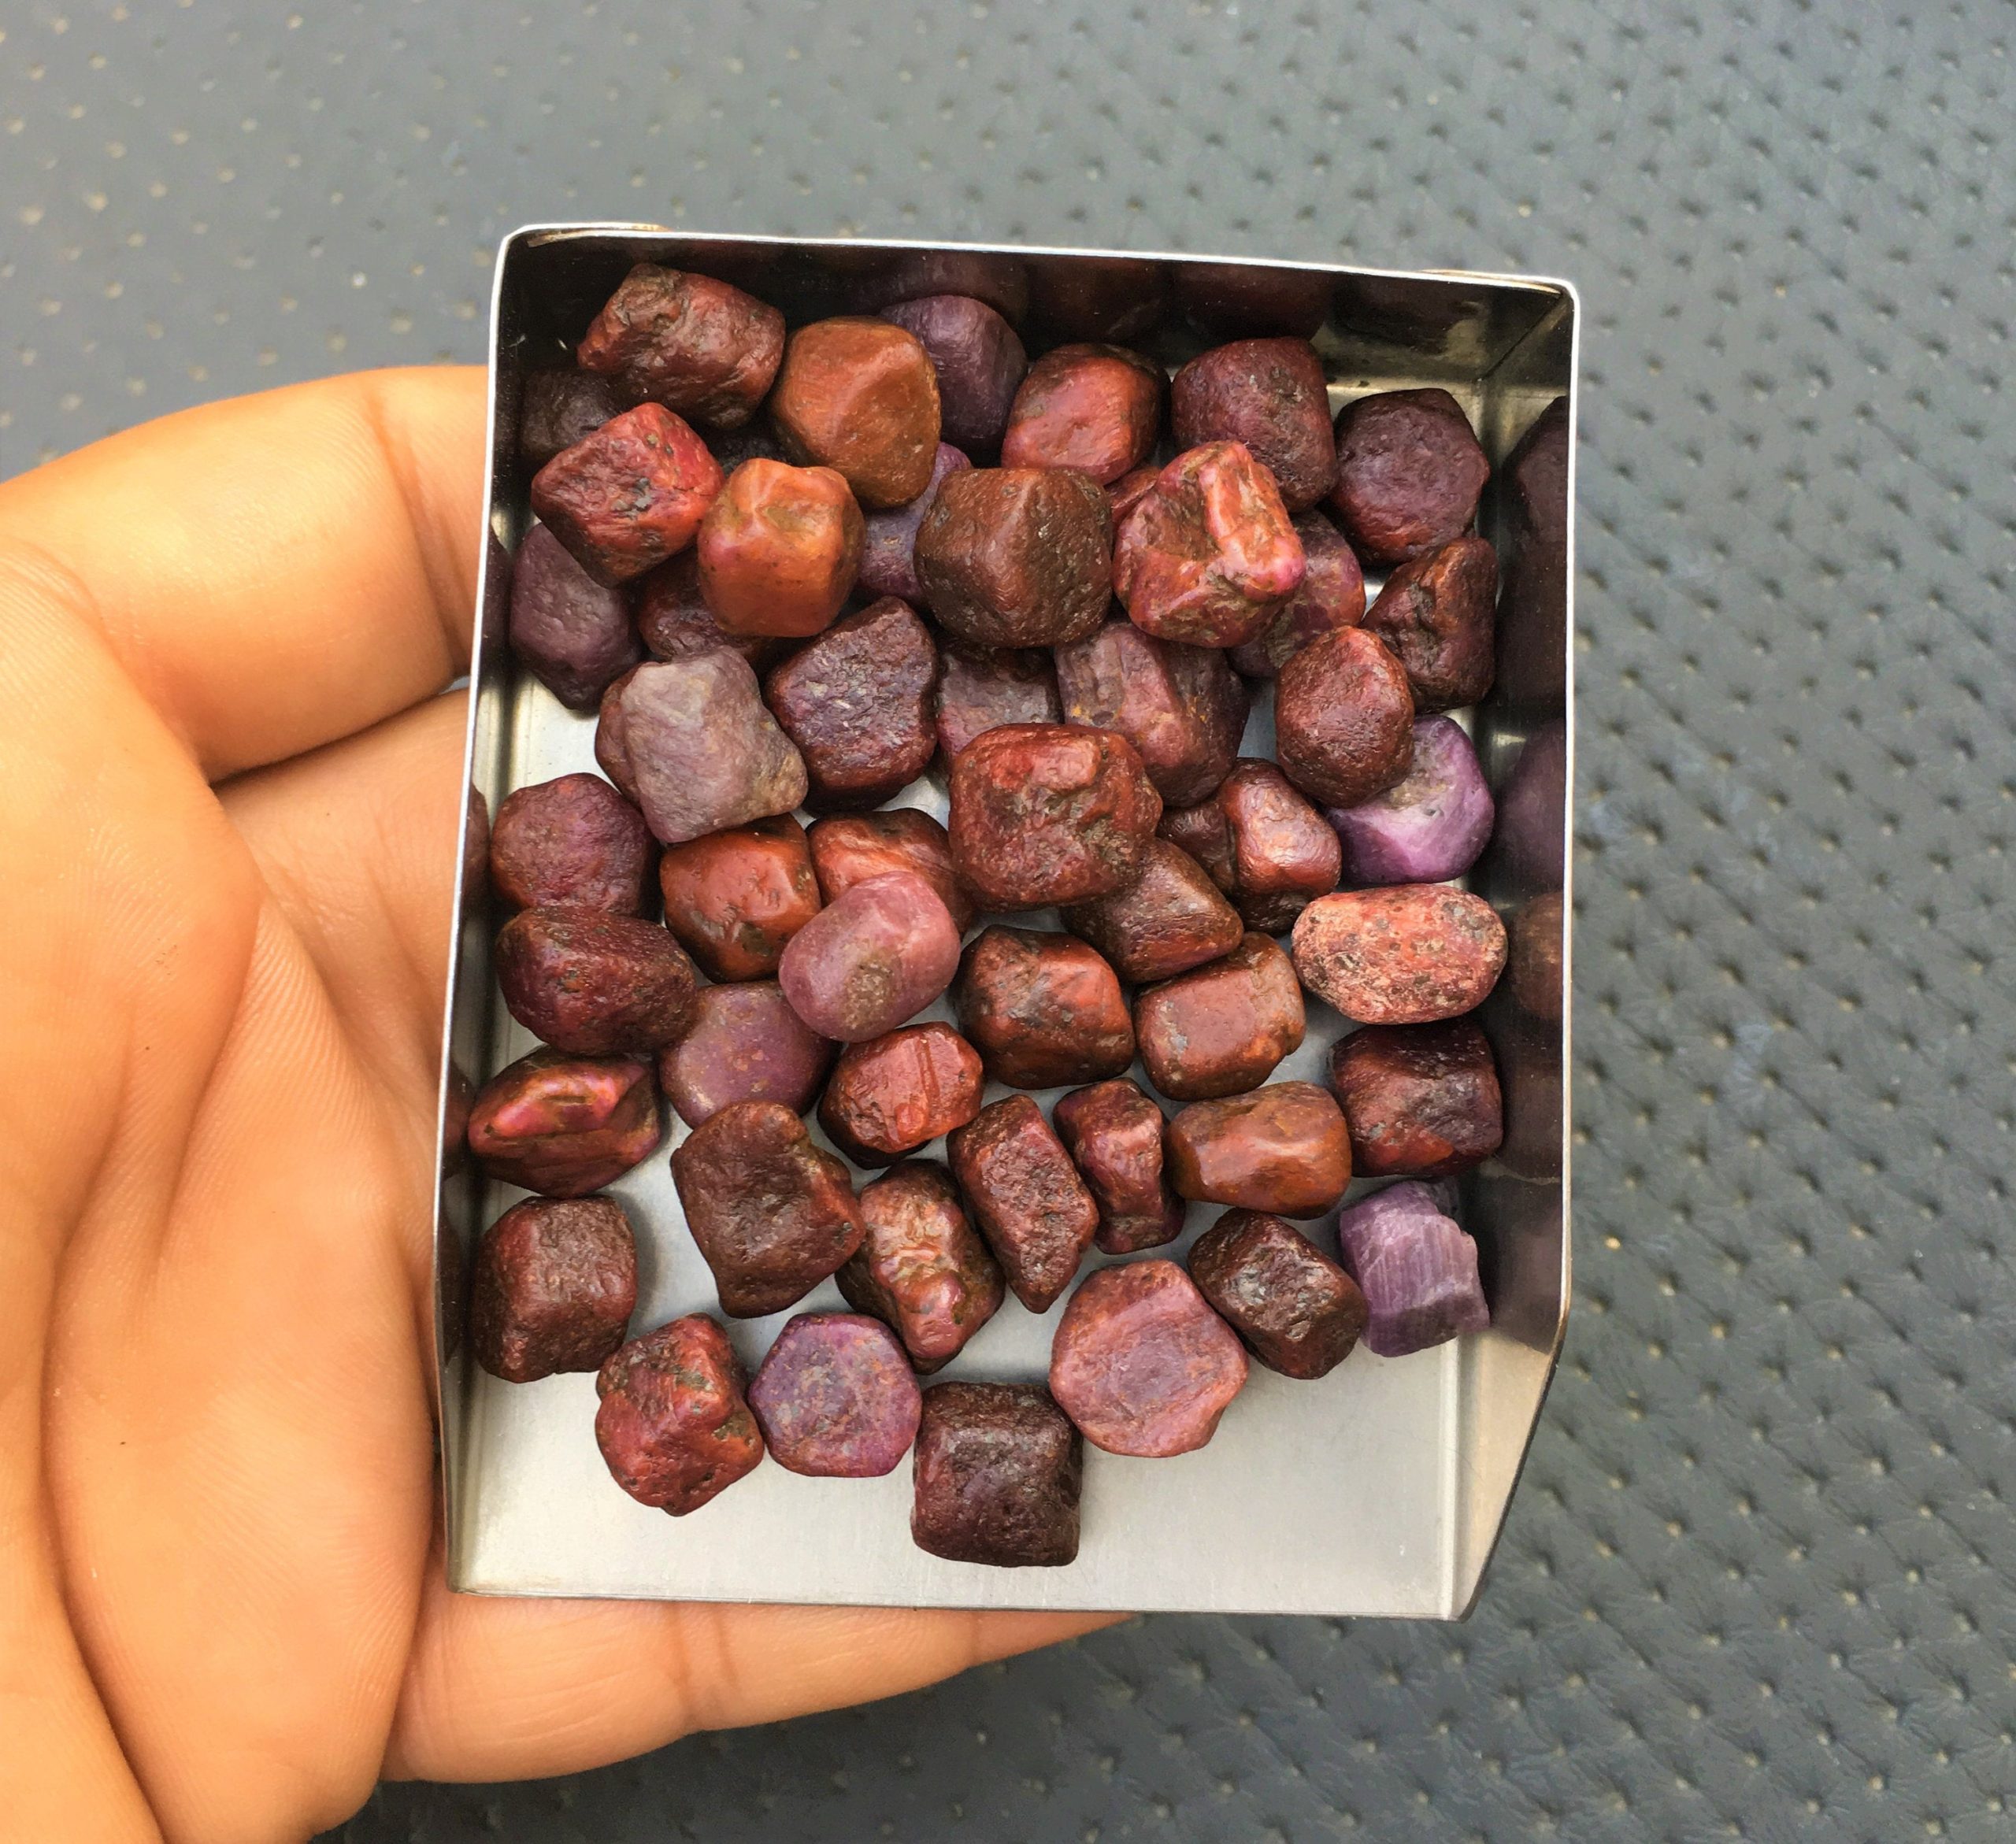 25 Pieces Natural Ruby Gemstone Rough,size 10-12 Mm Ruby ,ruby Rough,jewelry Raw Gemstone Loose Ruby Rough, Star Ruby Crystal Ruby Wholesale